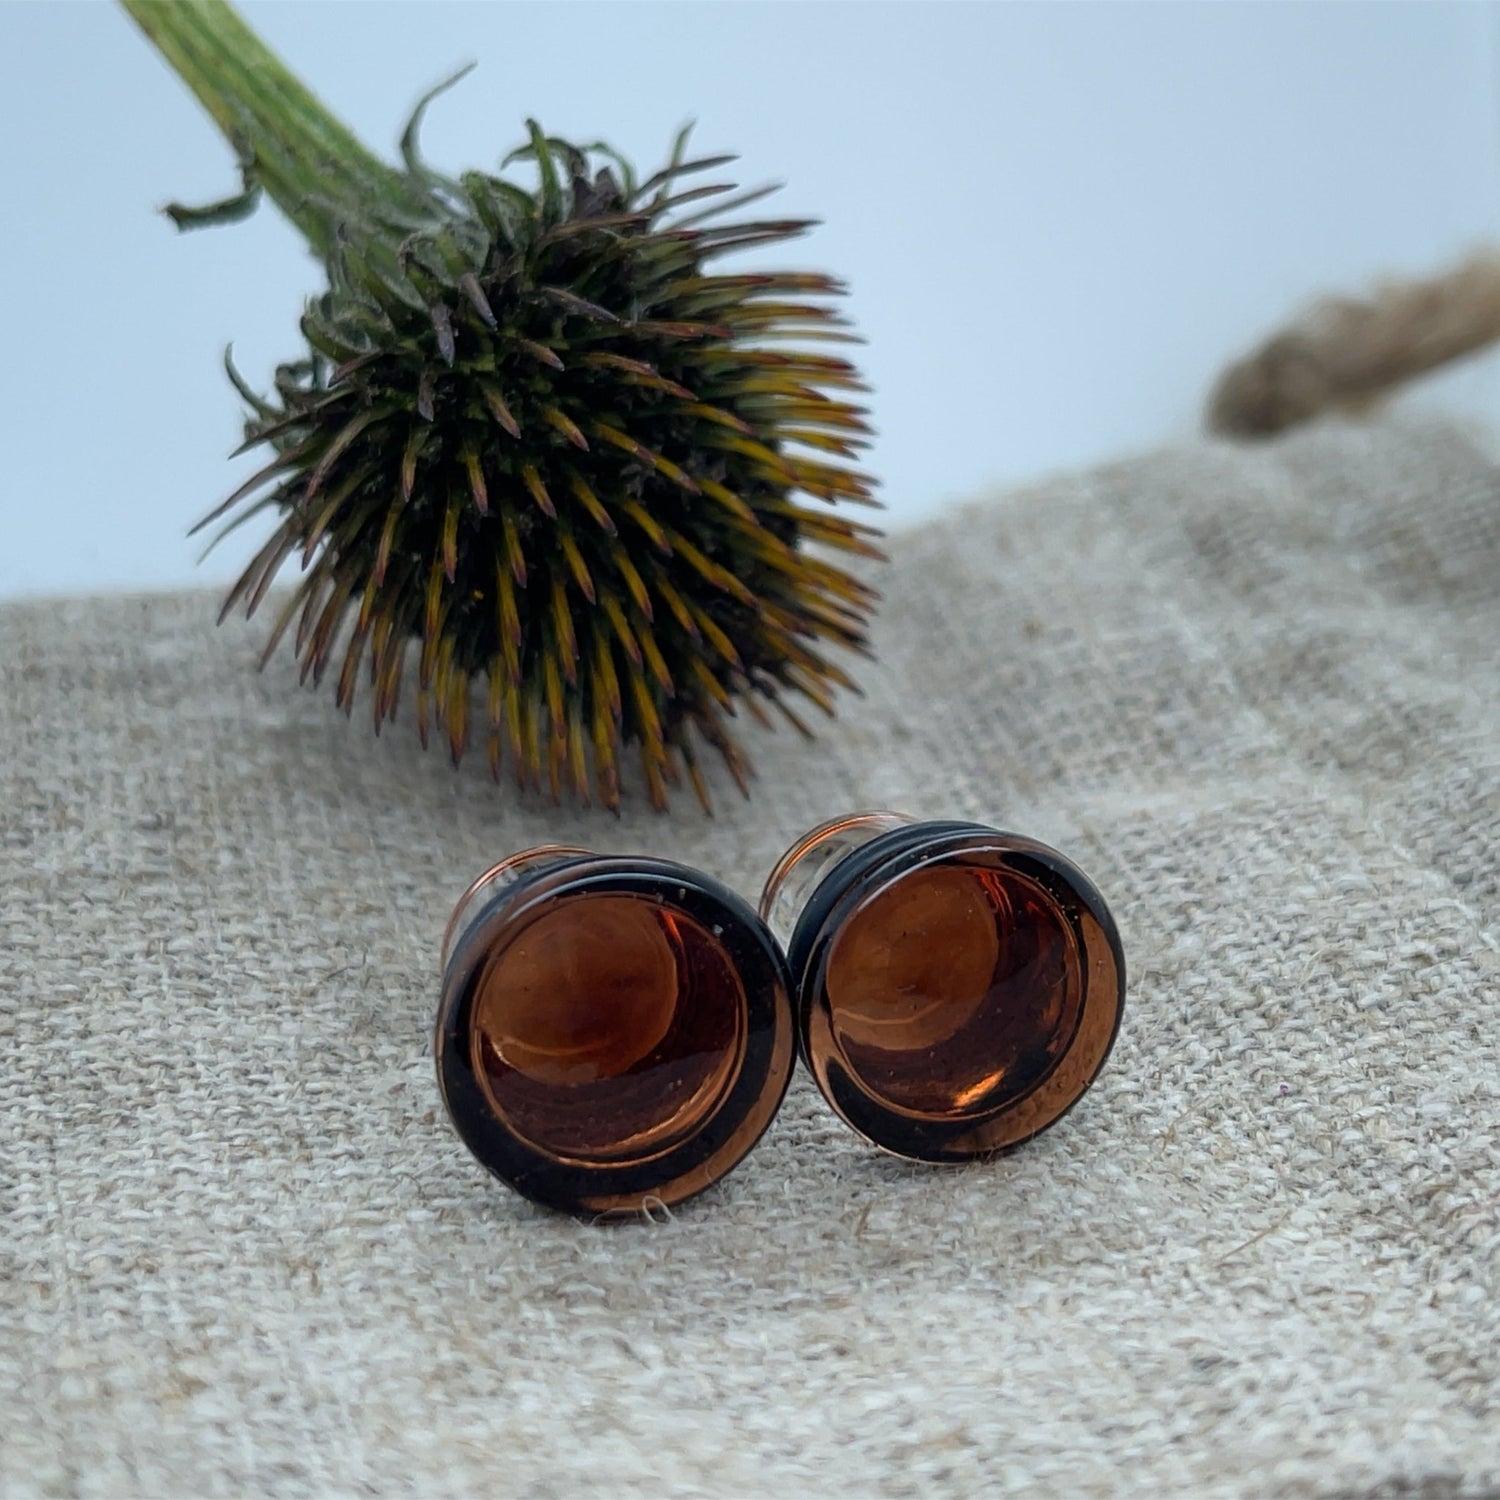 Single Flare Colorfront Plugs - 000g - Pair - Agave in Bloom